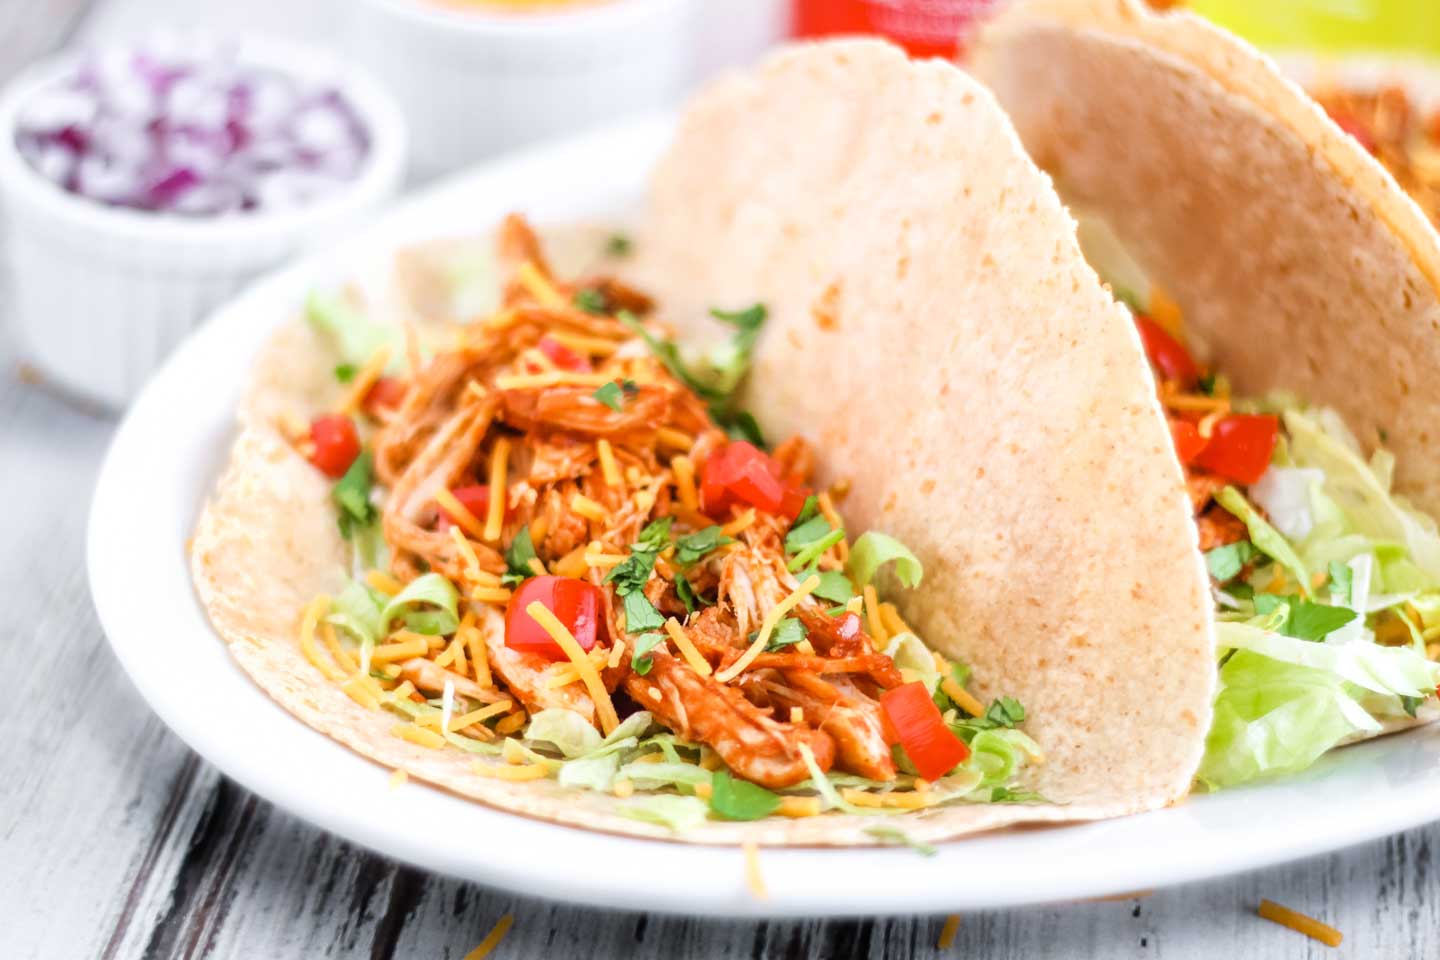 These crock pot chicken tacos served on whole wheat tortillas, instead of corn. Lined up on a serving platter and sprinkled with lettuce, cheese and tomato.